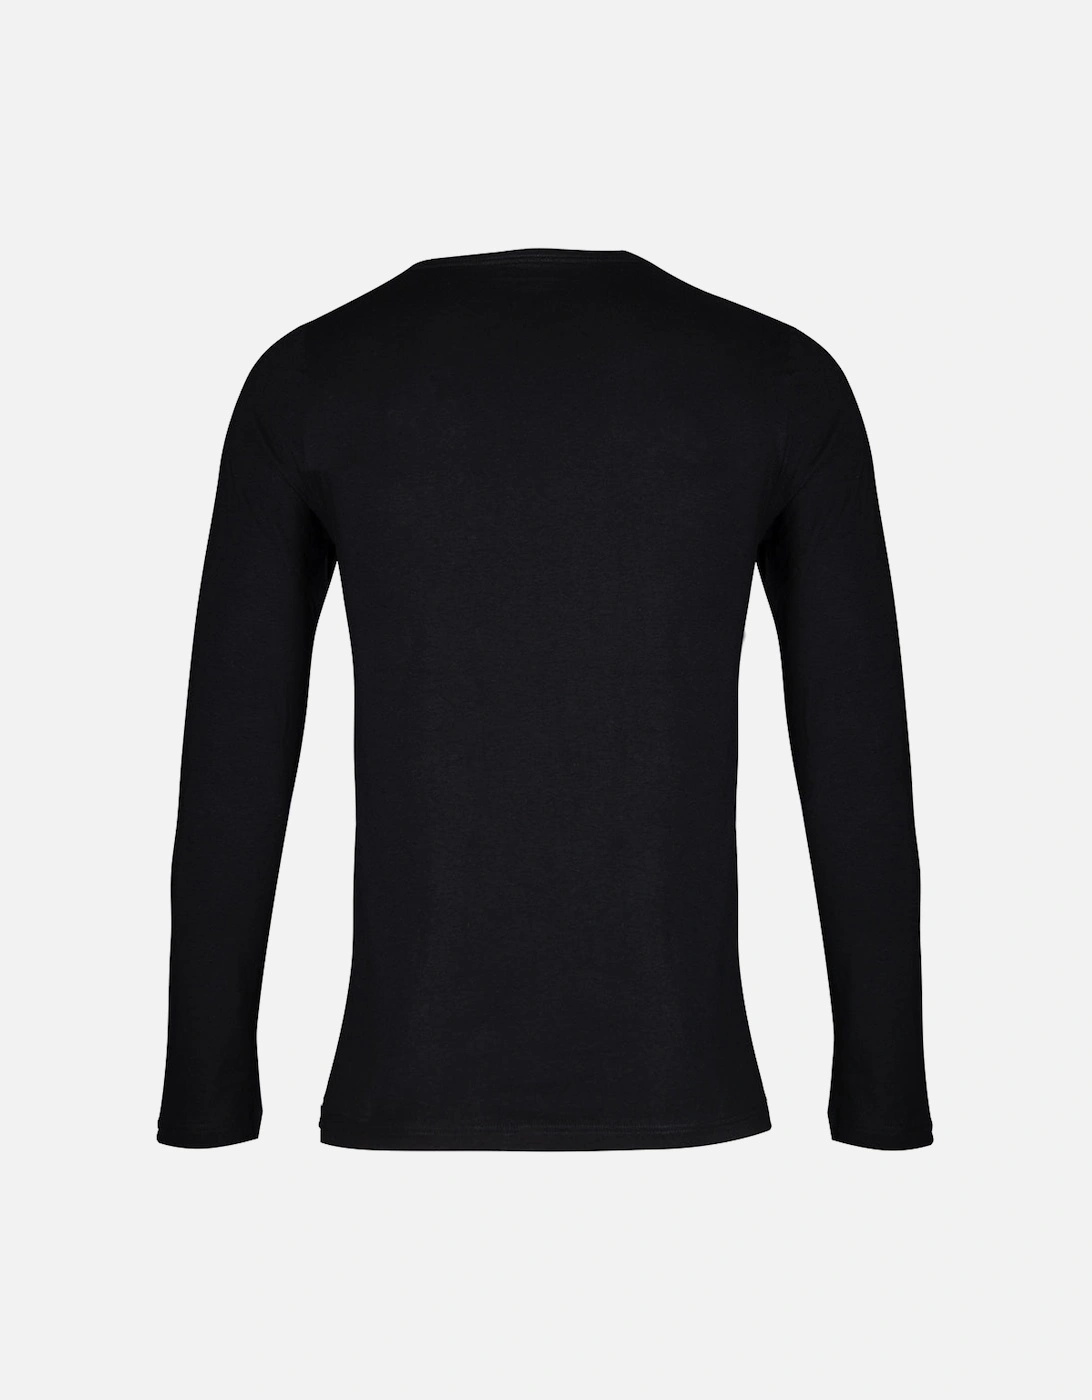 Luxe Thermal Long-Sleeve Jersey Top, Black